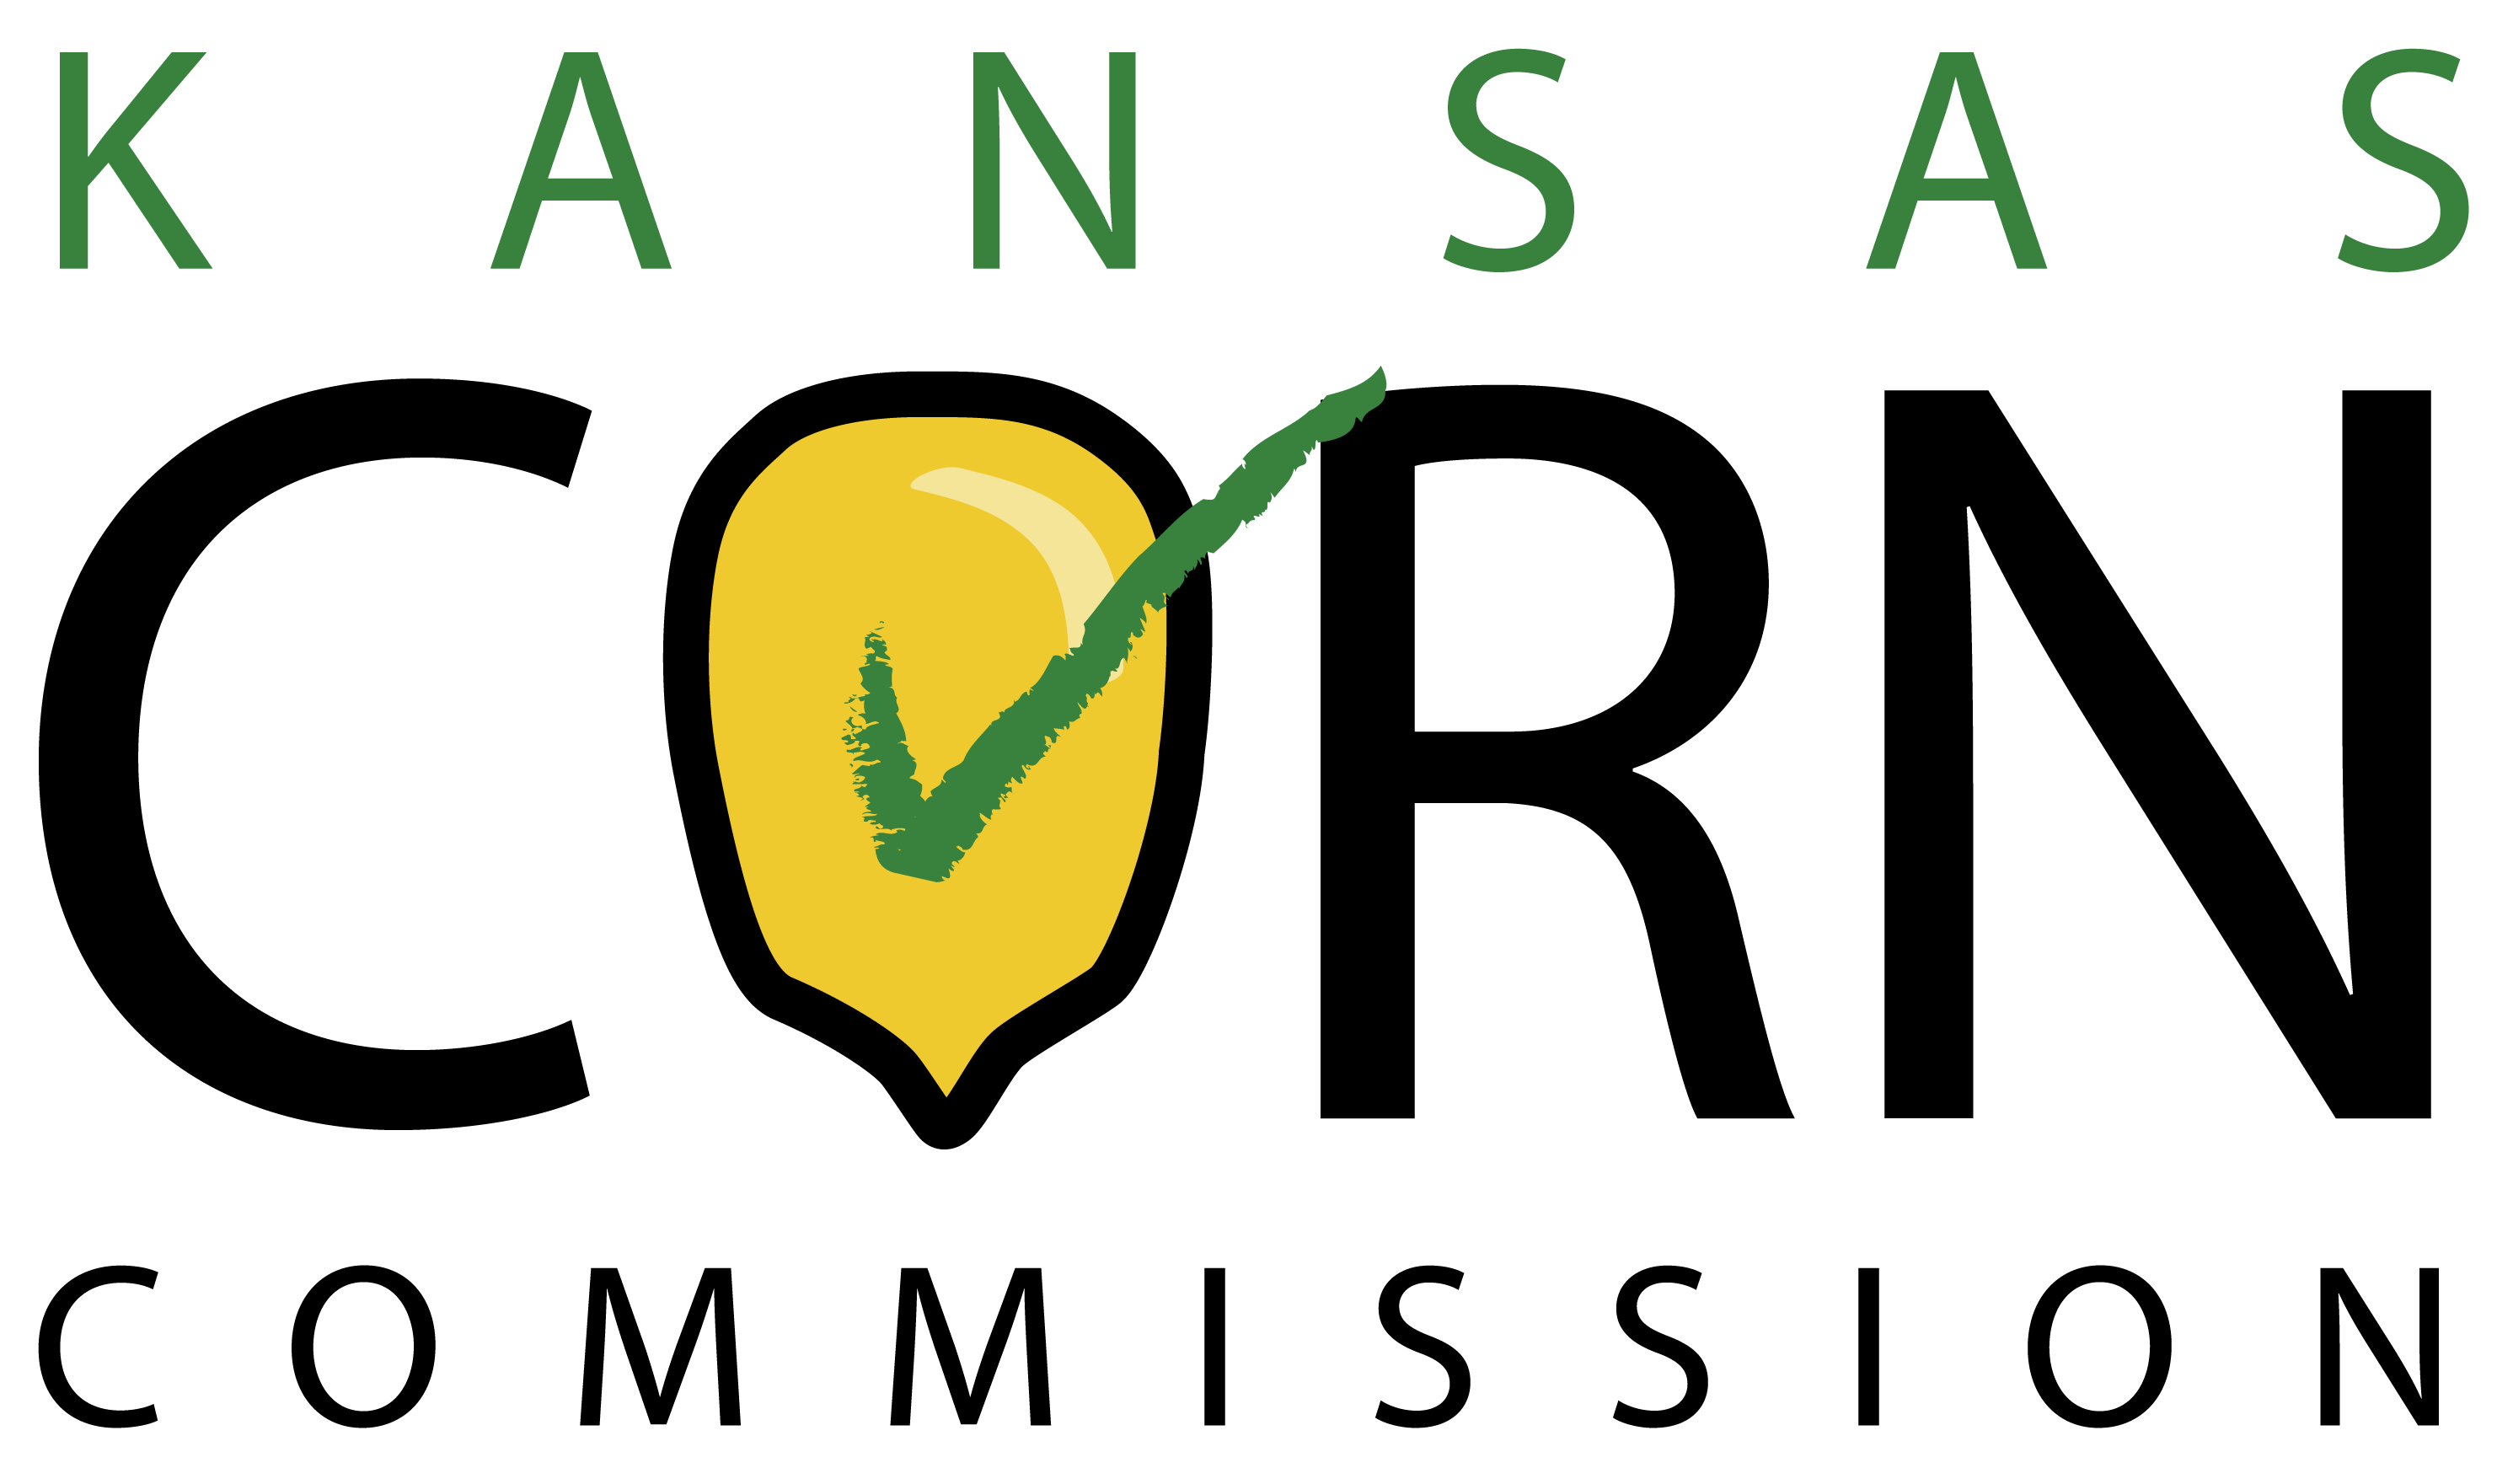 in green, the word Kansas, with Corn Commission written below in black. The "o" in corn is shaped like a yellow corn kernel with a green checkmark